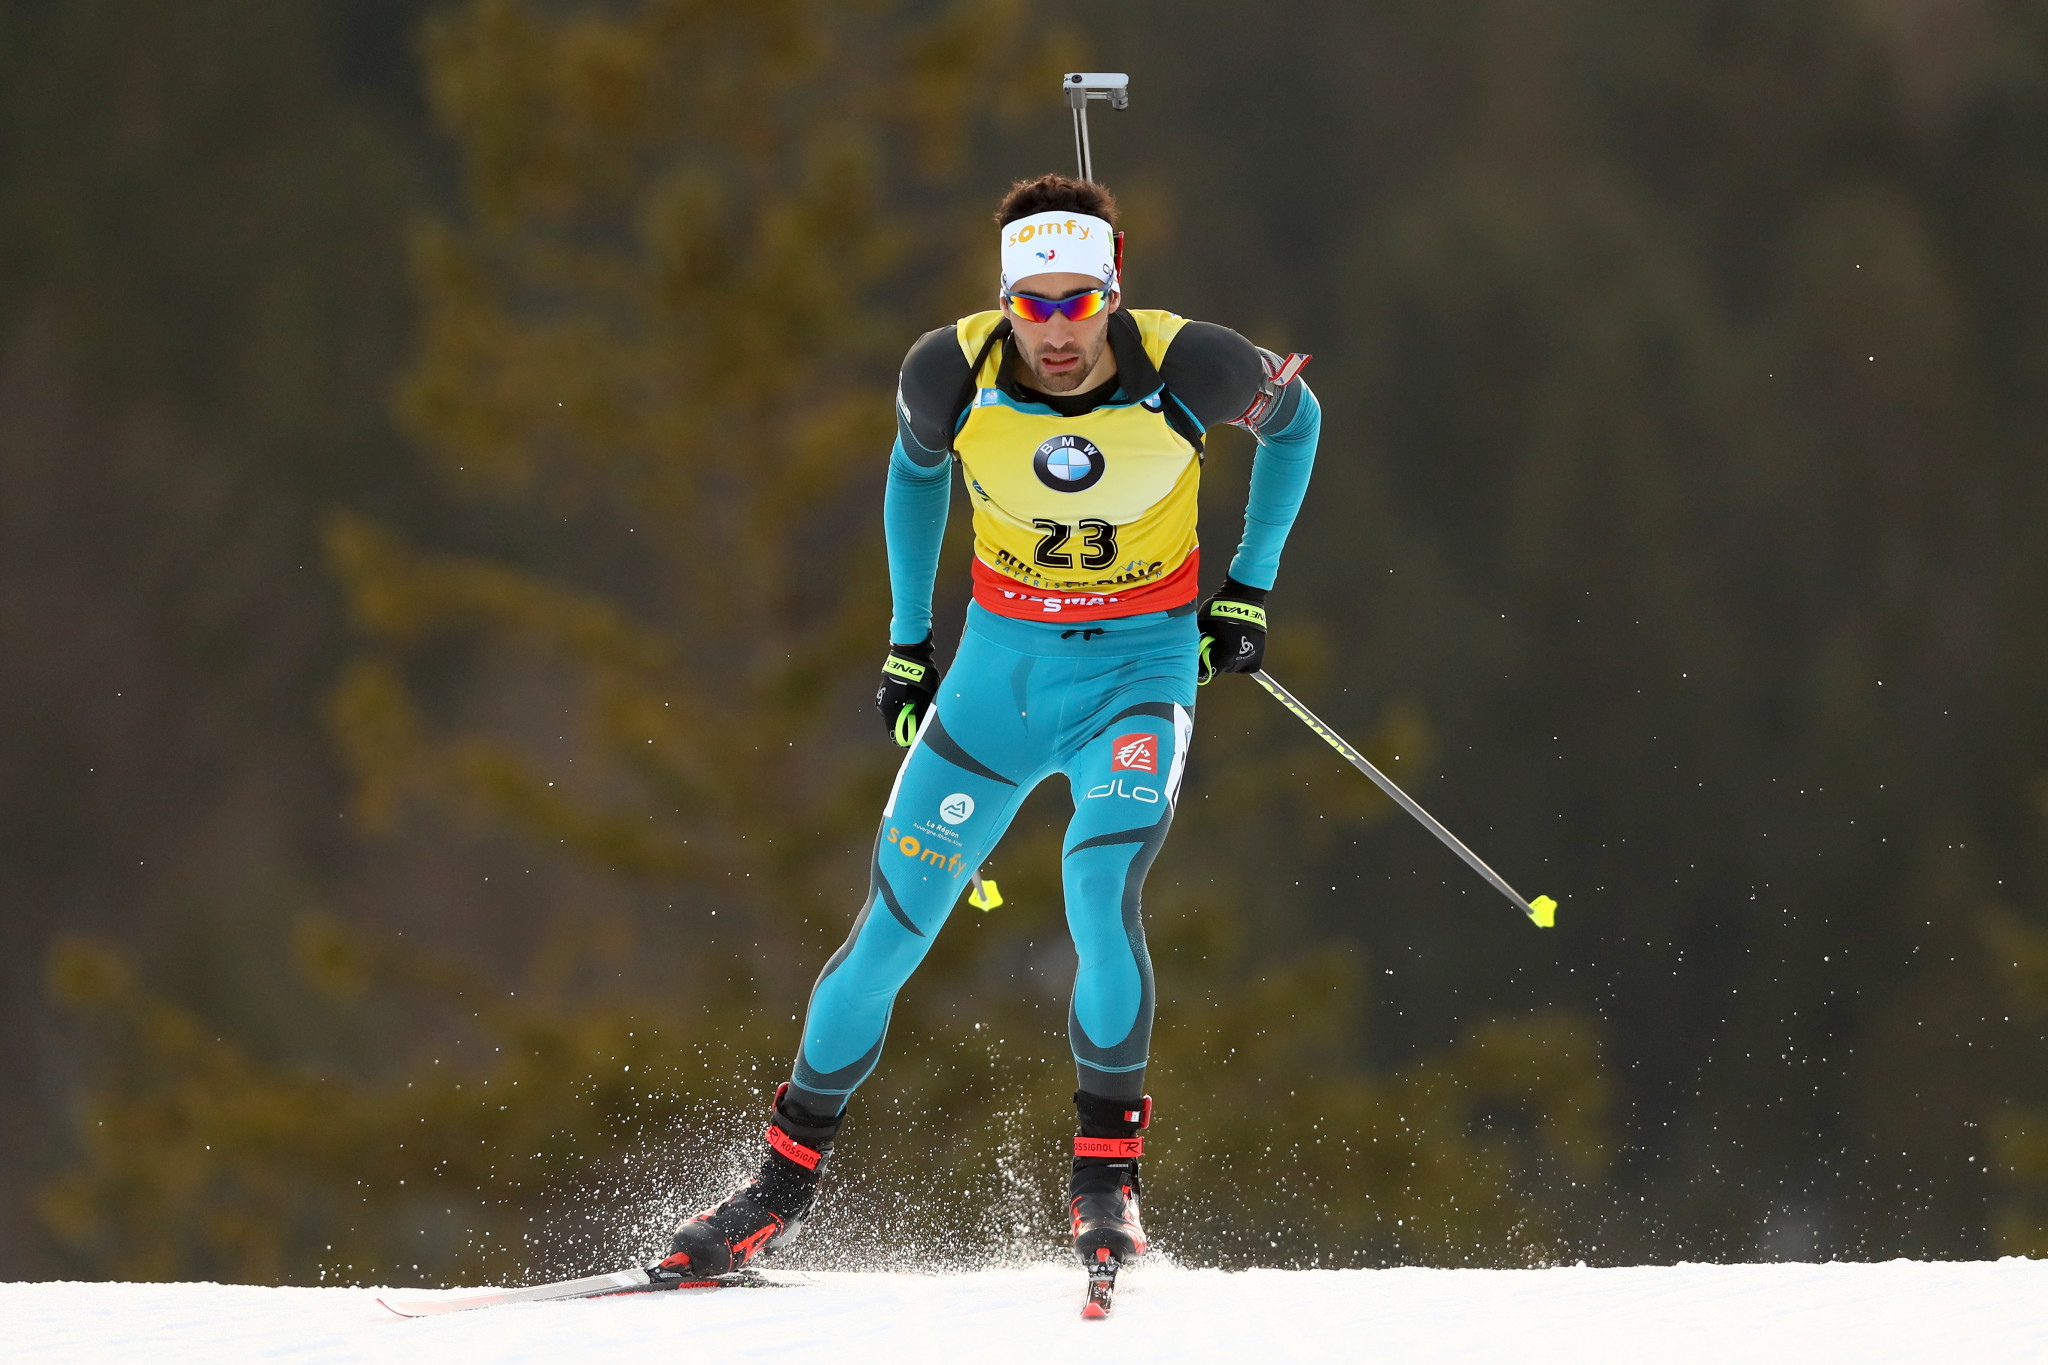 Fourcade clinches fourth consecutive IBU World Cup victory with 20km triumph in Ruhpolding